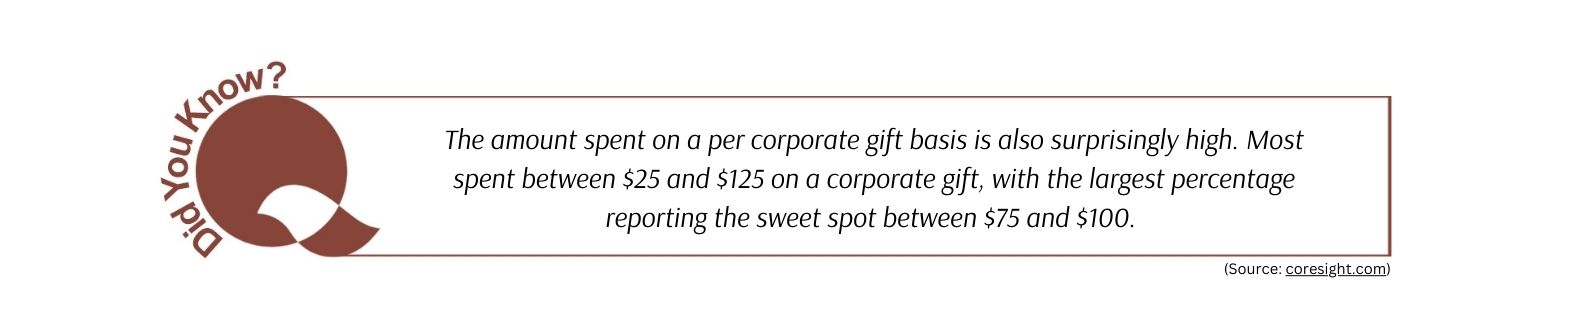 The amount spent on a per corporate gift basis is also surprisingly high. Most spent between $25 and $125 on a corporate gift, with the largest percentage reporting the sweet spot between $75 and $100.